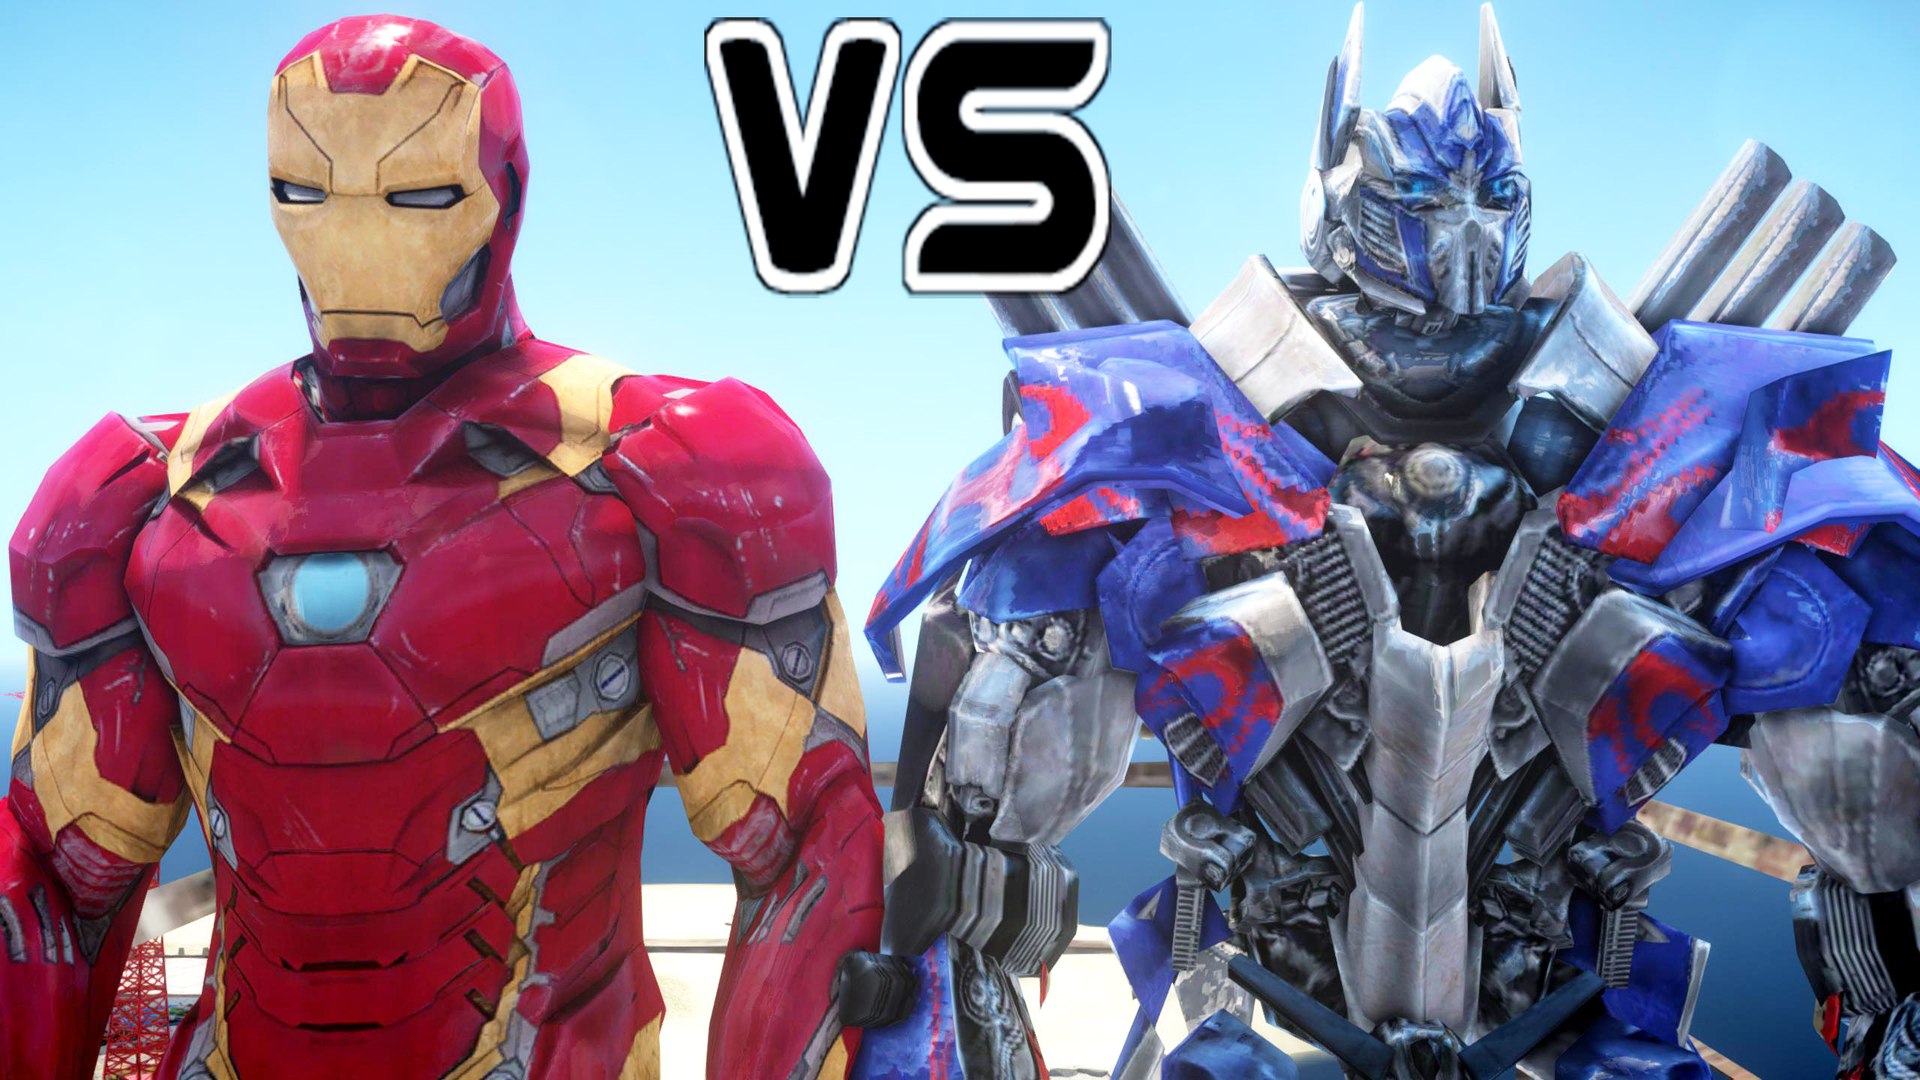 Ironman Vs dr. Octopus fighting gaming Video - video Dailymotion